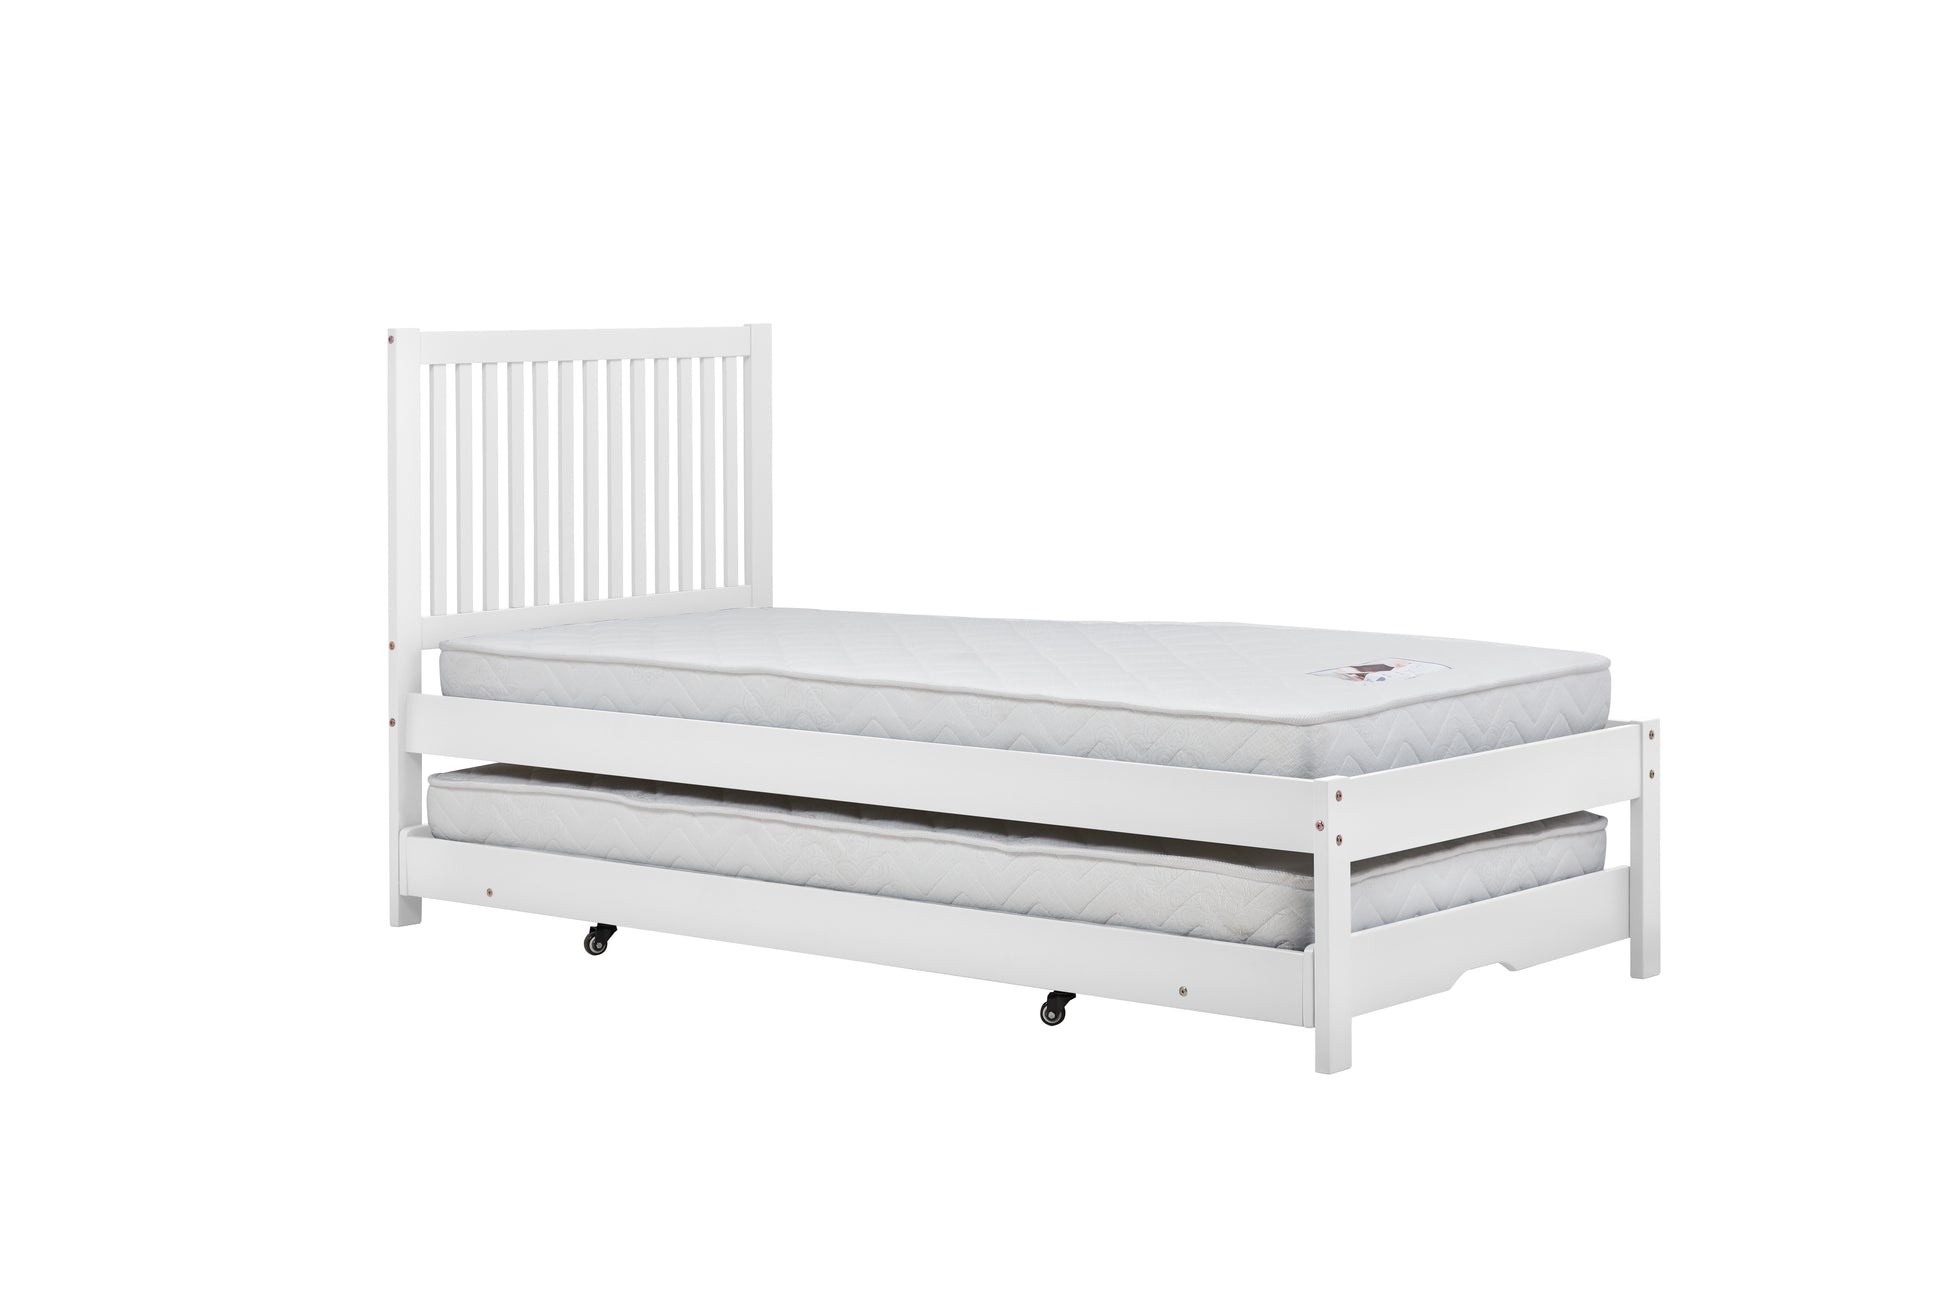 Buxton Trundle Bed